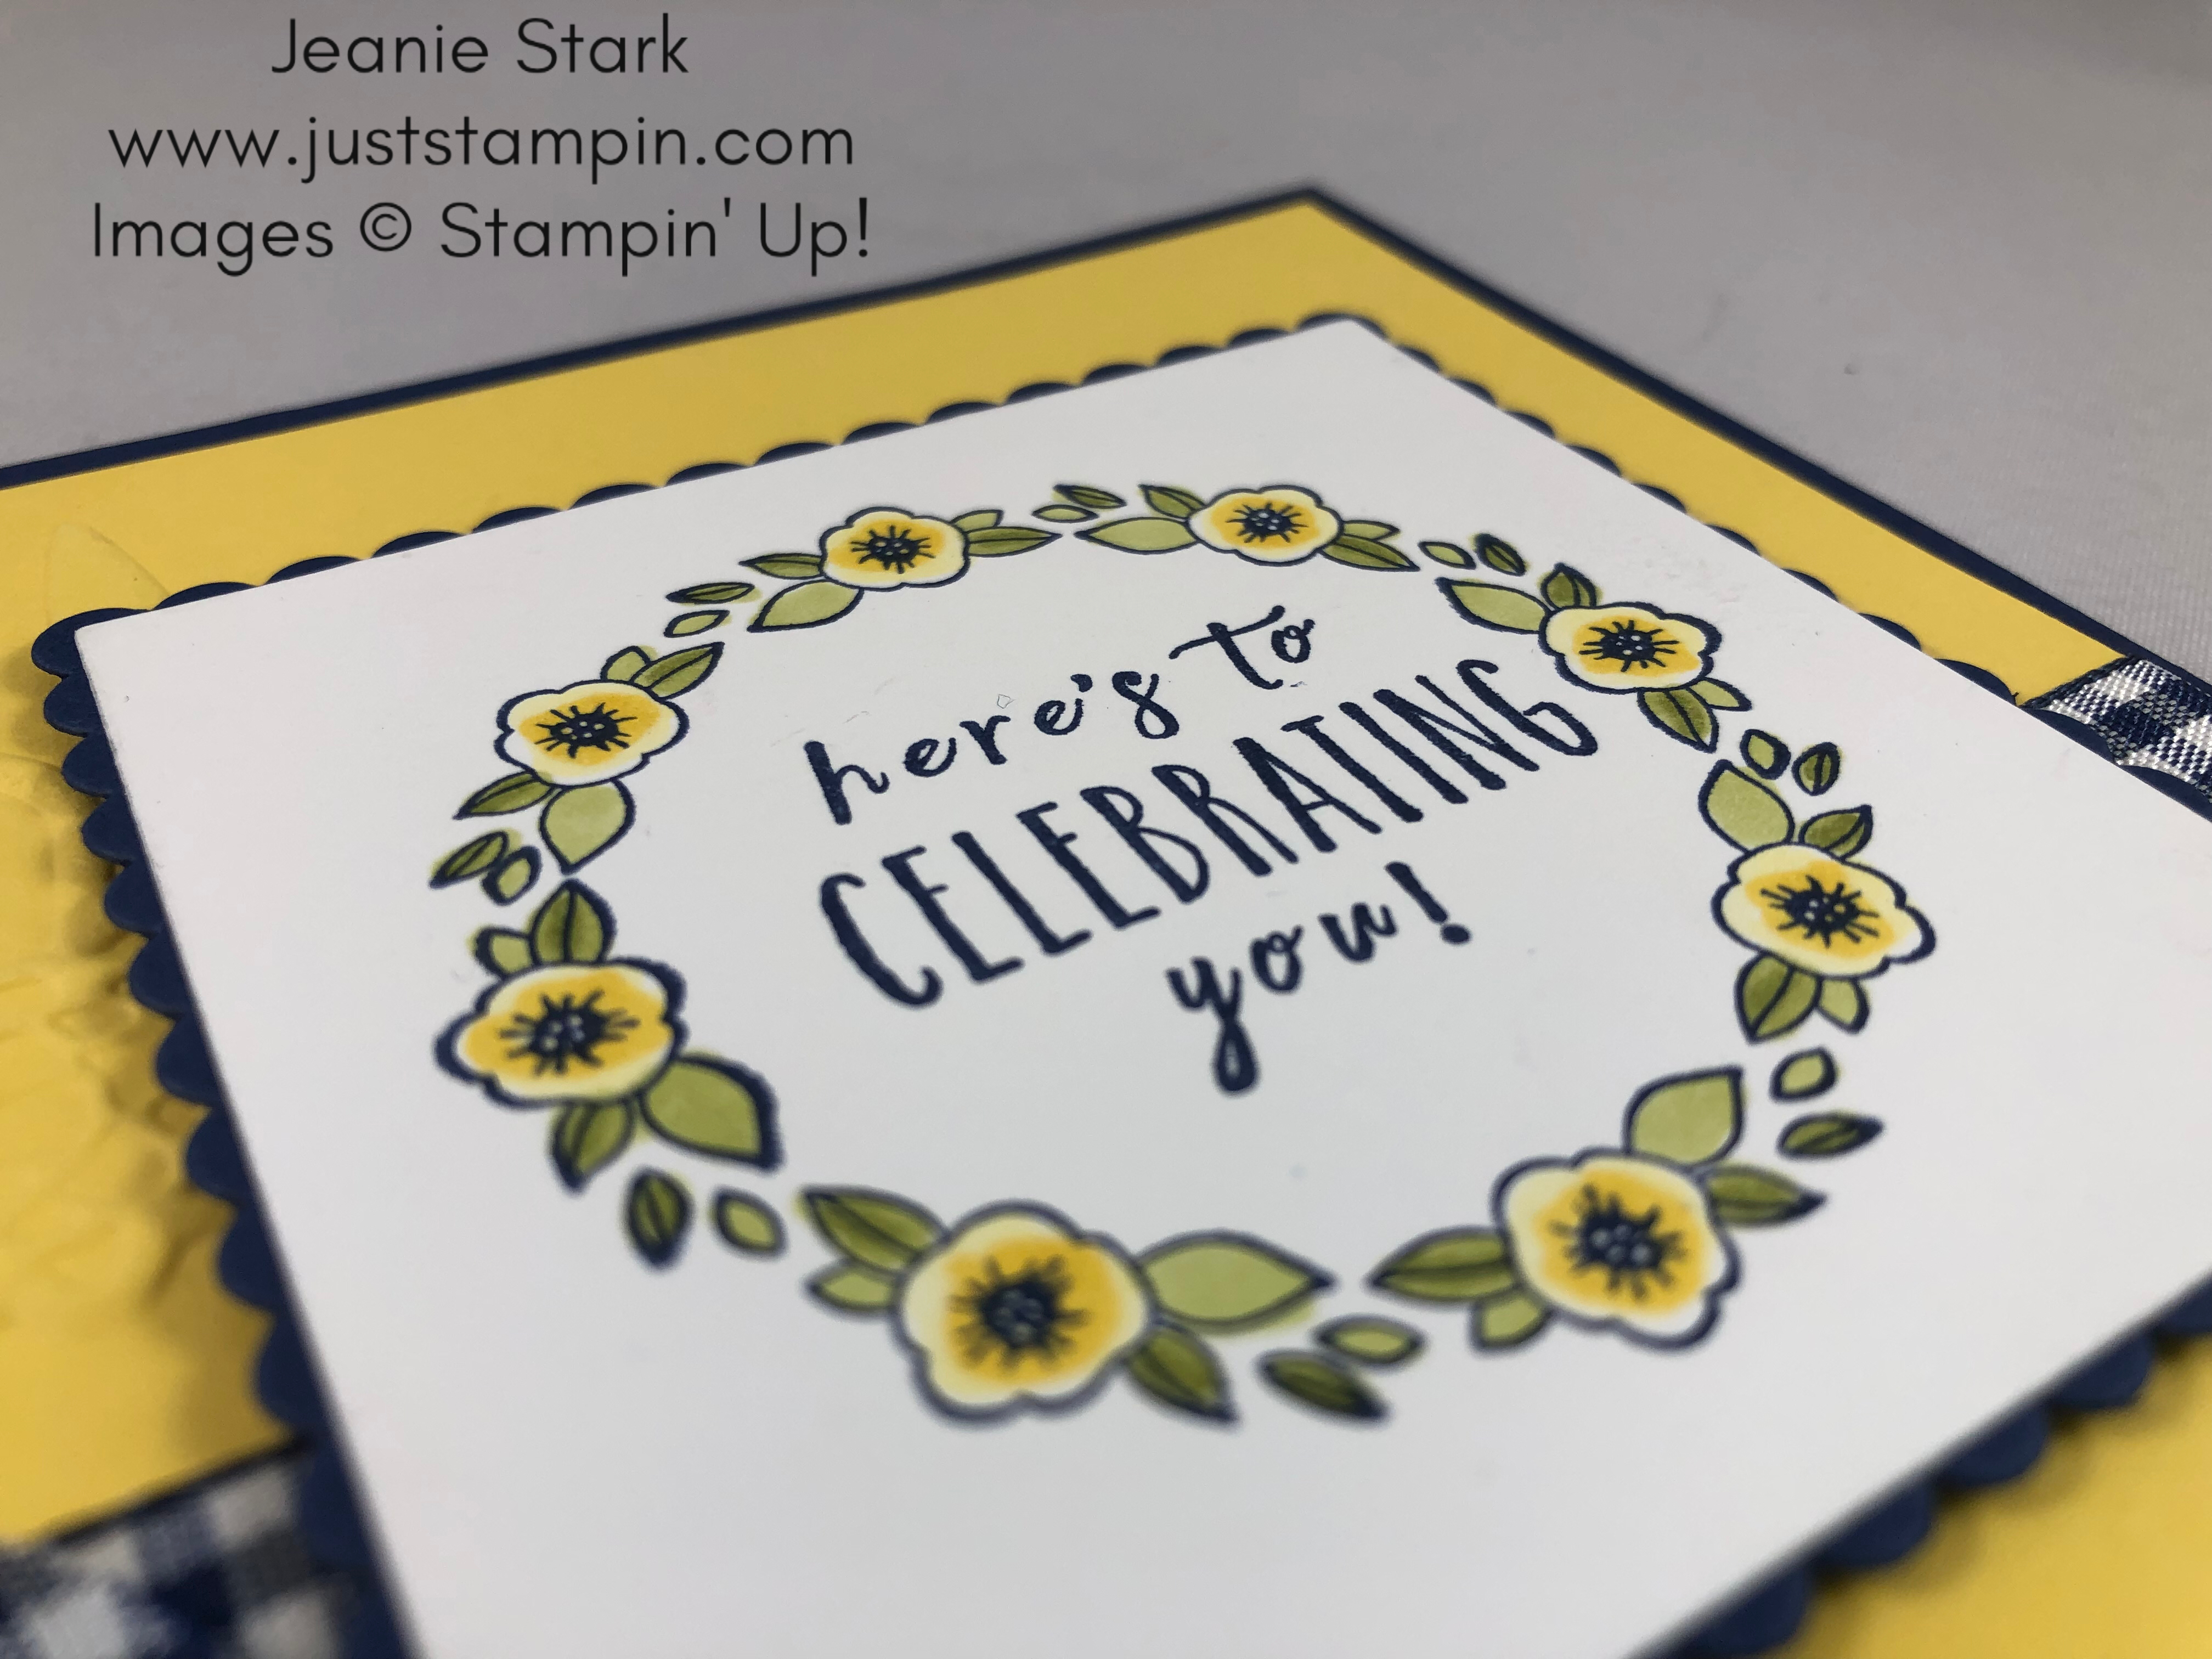 Stampin Up Perennail Birthday card idea using the wreath builder technique and the Accented Blooms stamp set with the Stamparatus - Jeanie Stark StampinUp